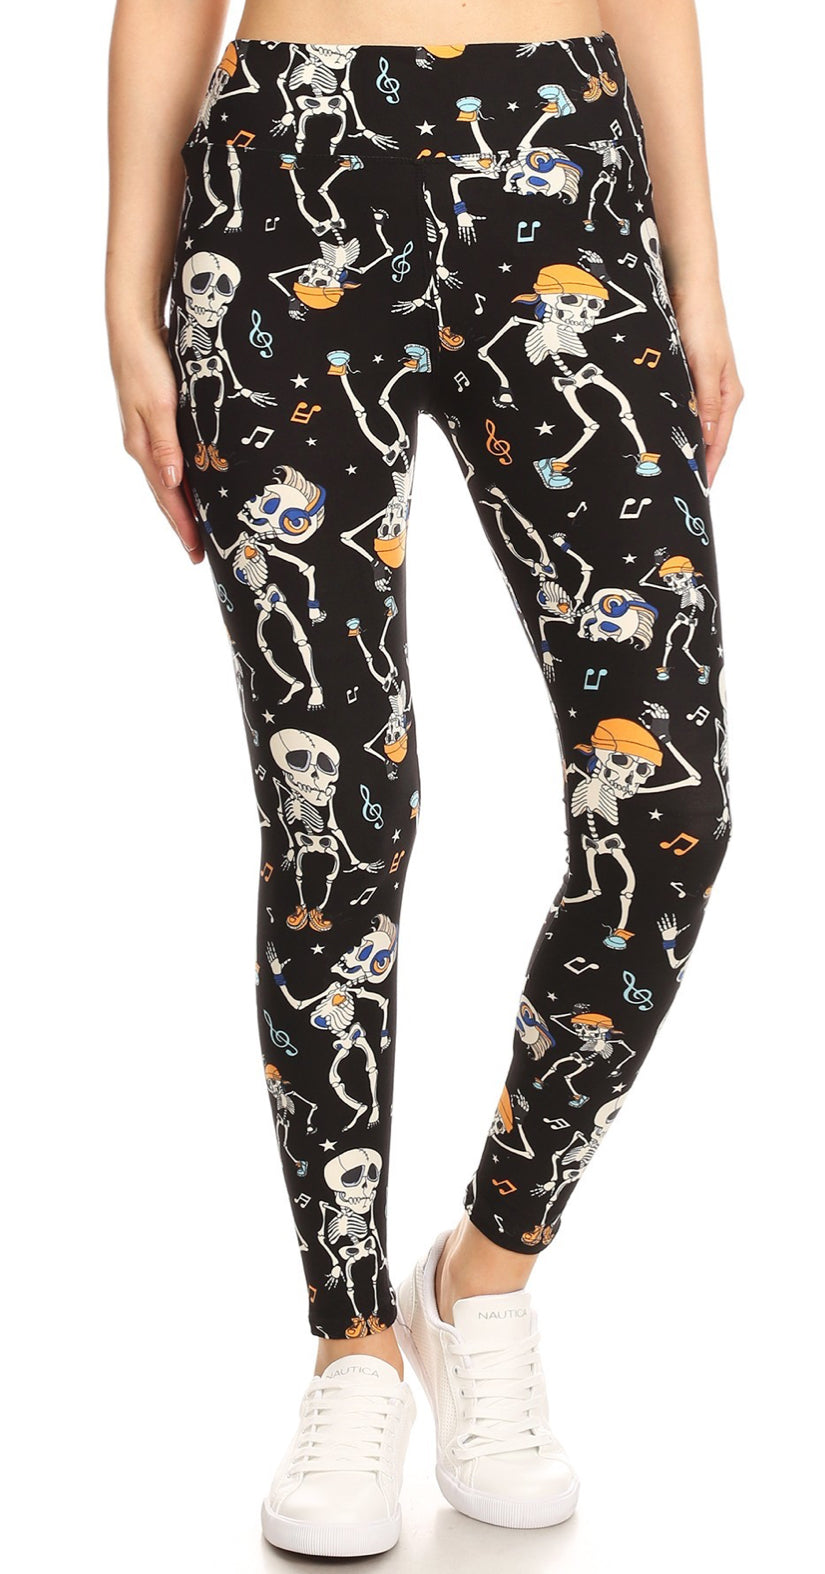 Shake, Rattle and Roll Leggings